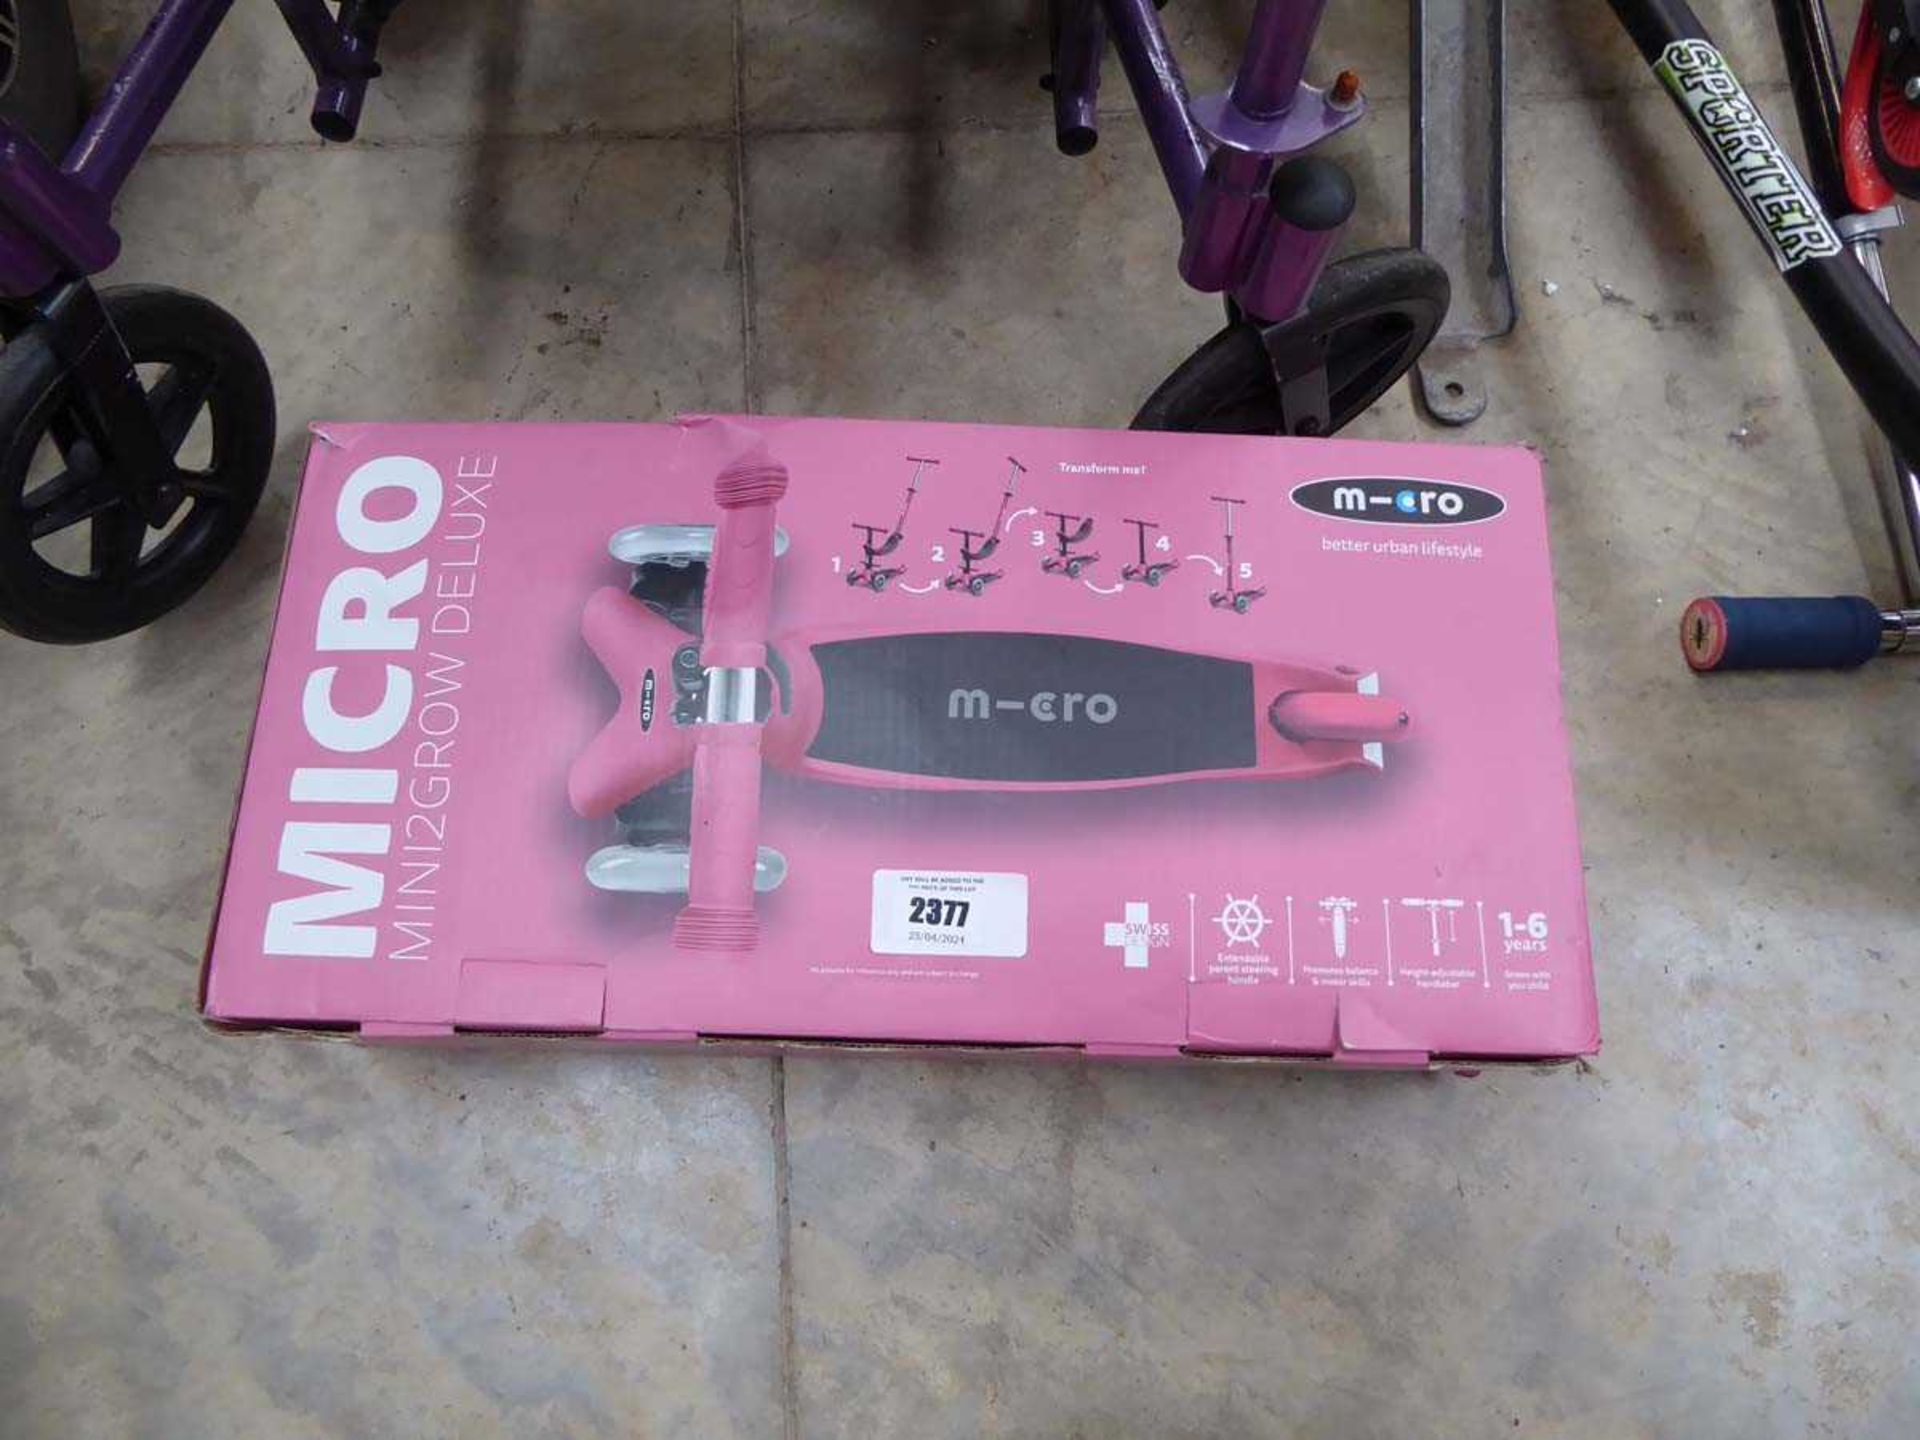 +VAT Boxed Micro Mini 2 grow Dulux scooter in pink